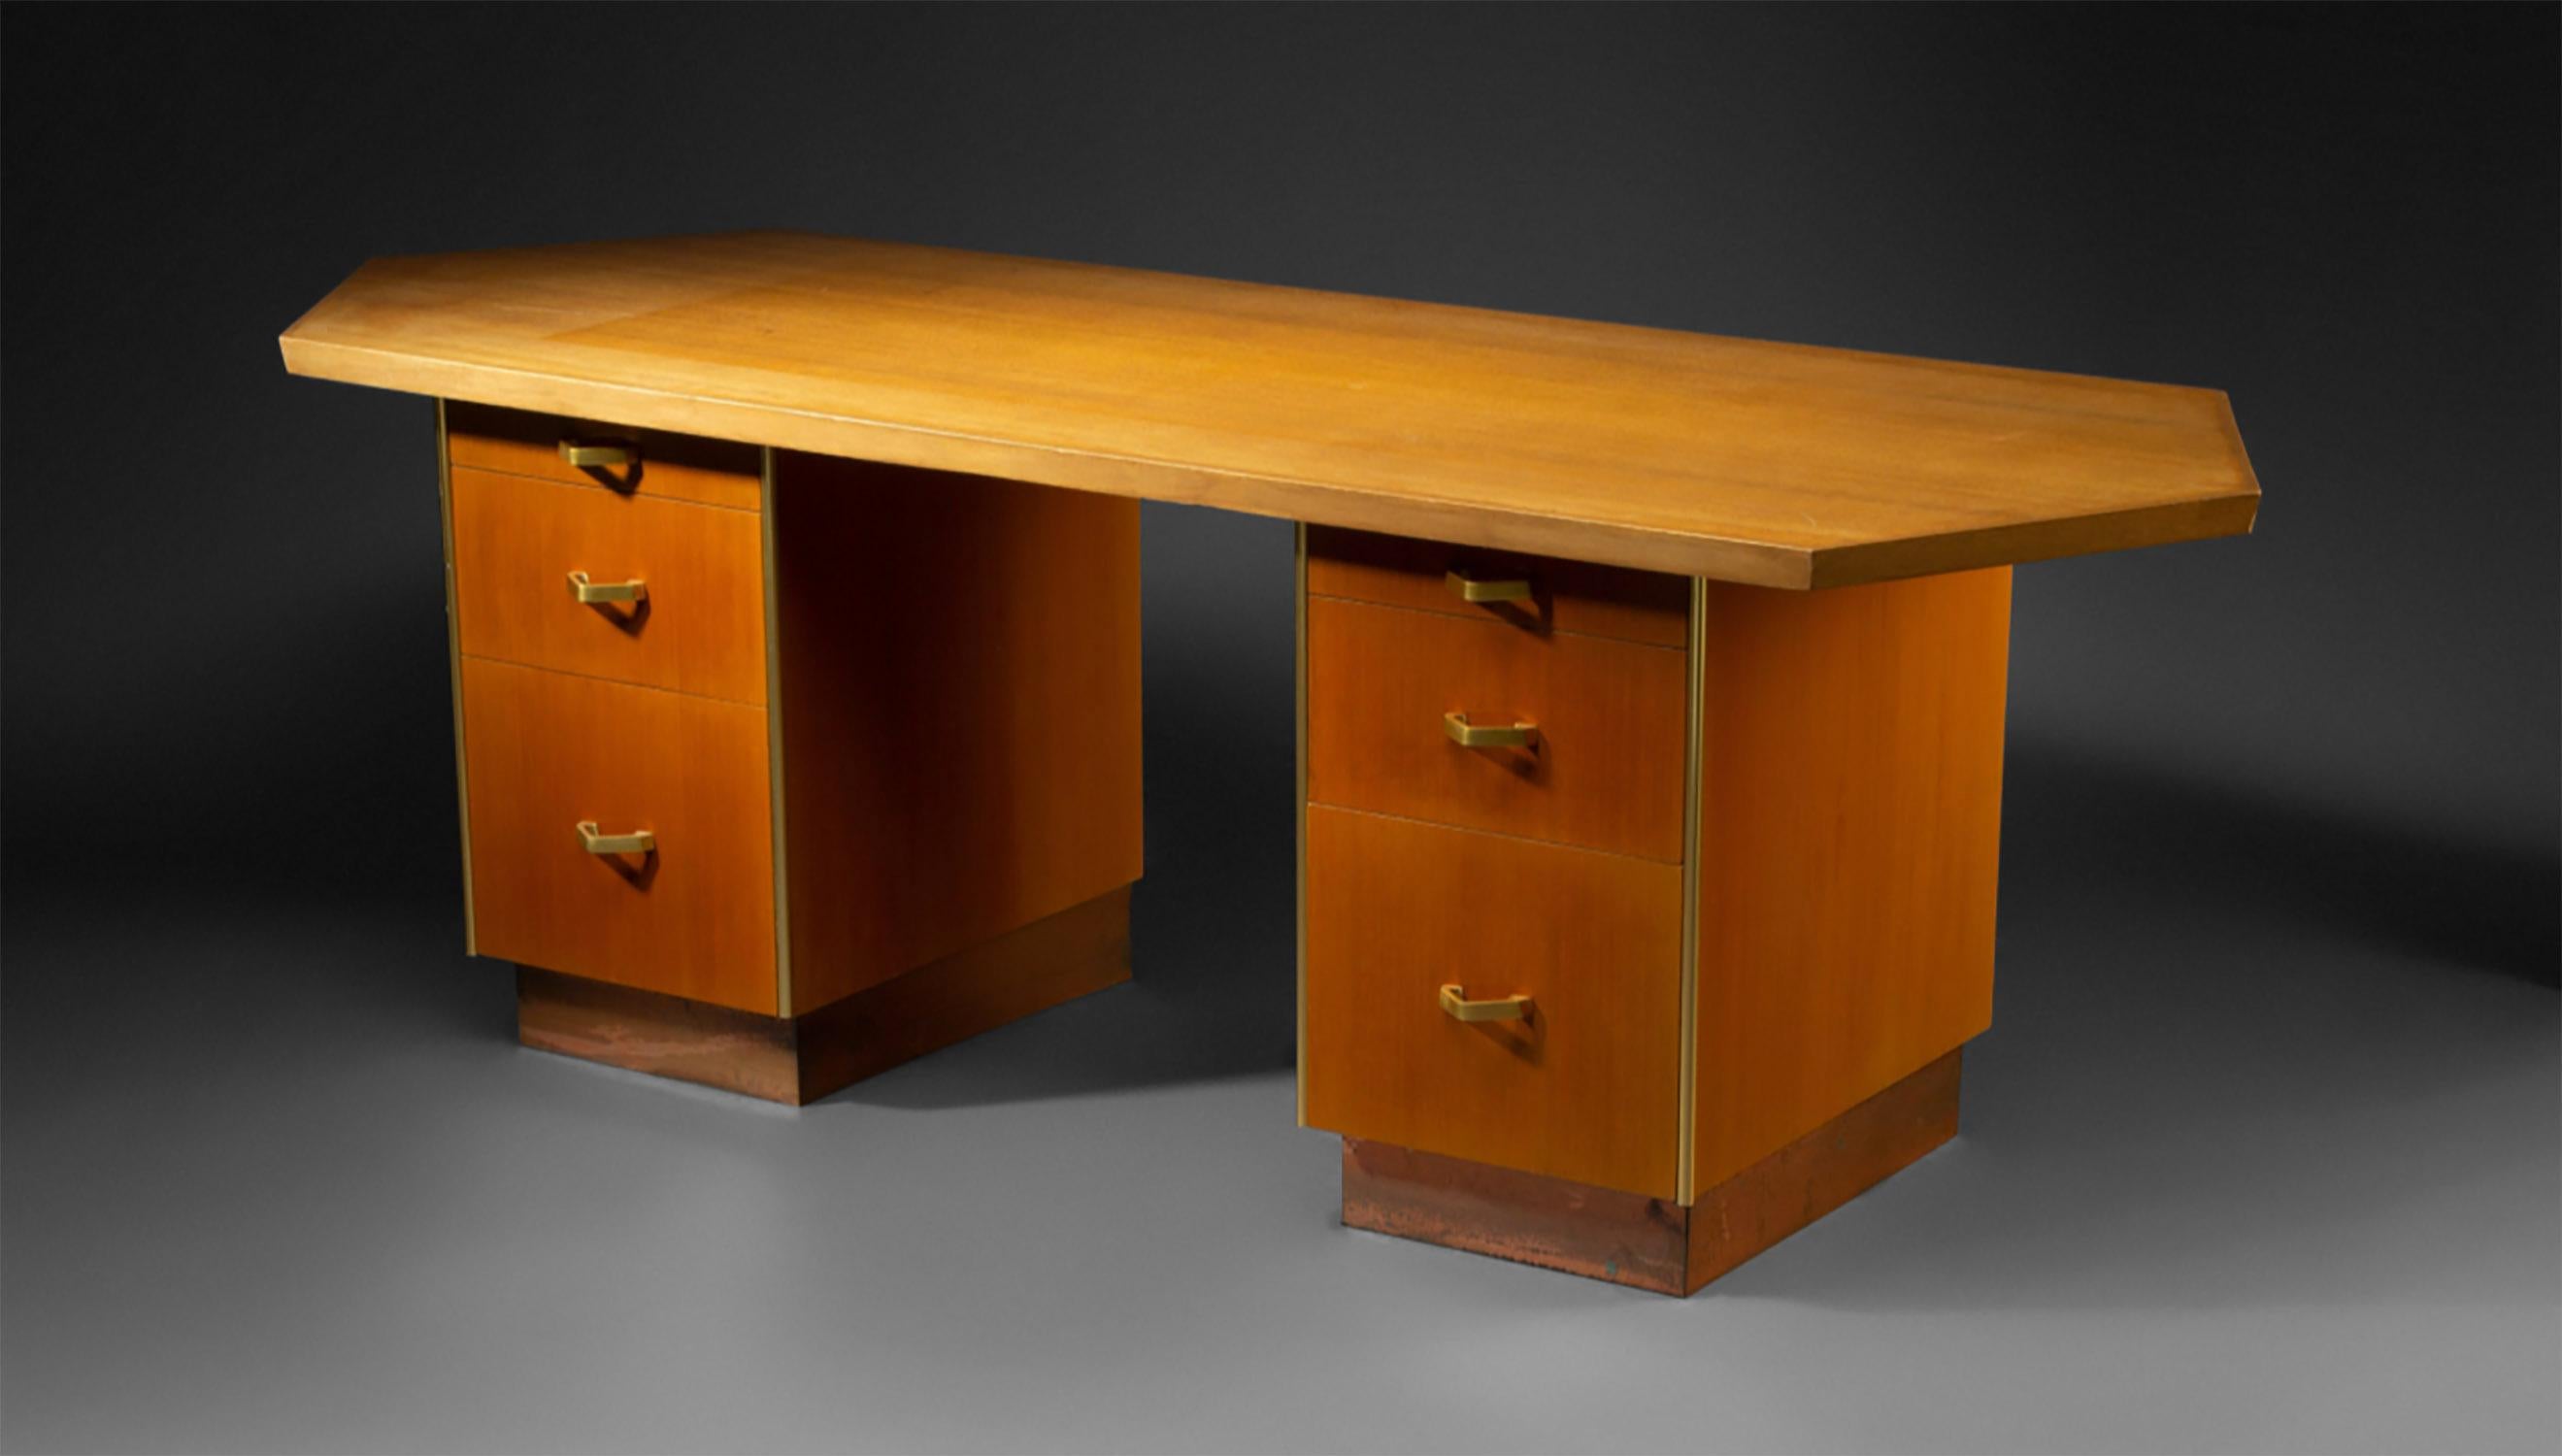 This is a unique studio produced desk designed by Frank Lloyd Wright for the Price Tower in Bartlesville Oklahoma. This particular example was commissioned by the owner of the tower, Carolyn Price, for her personal office. The desks in Price Tower